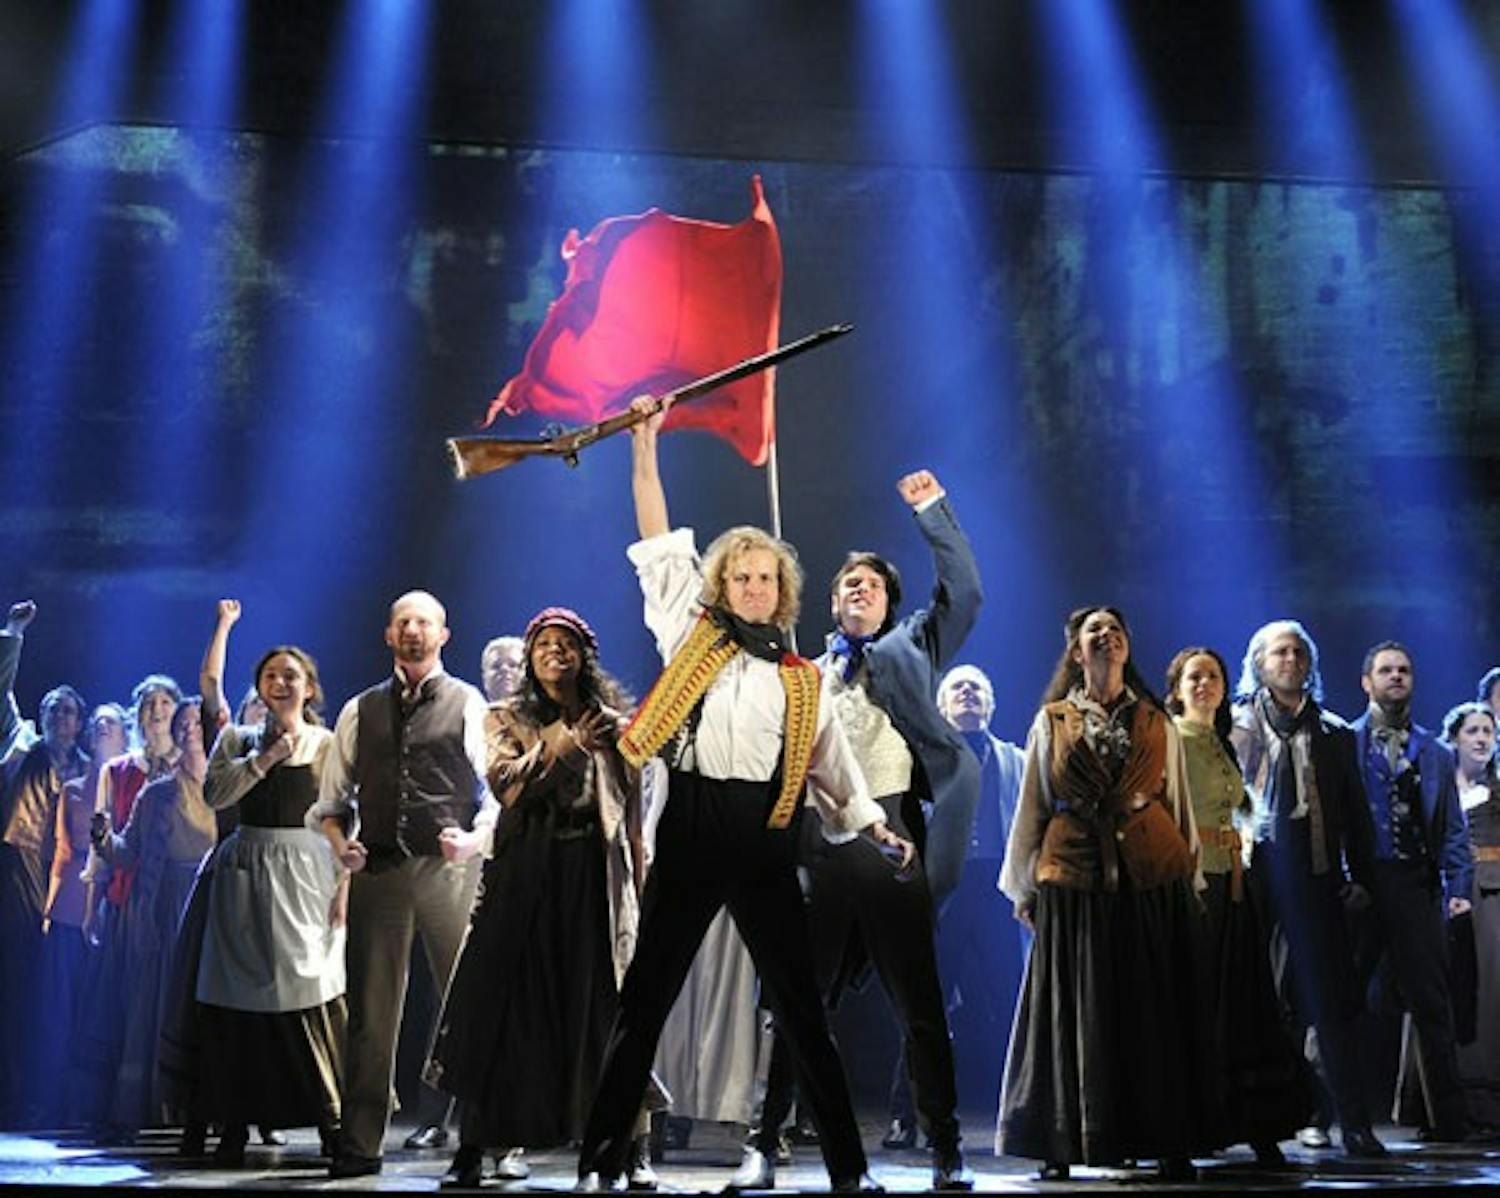 Les Misérables by Cameron Mackintosh, opening night November 28